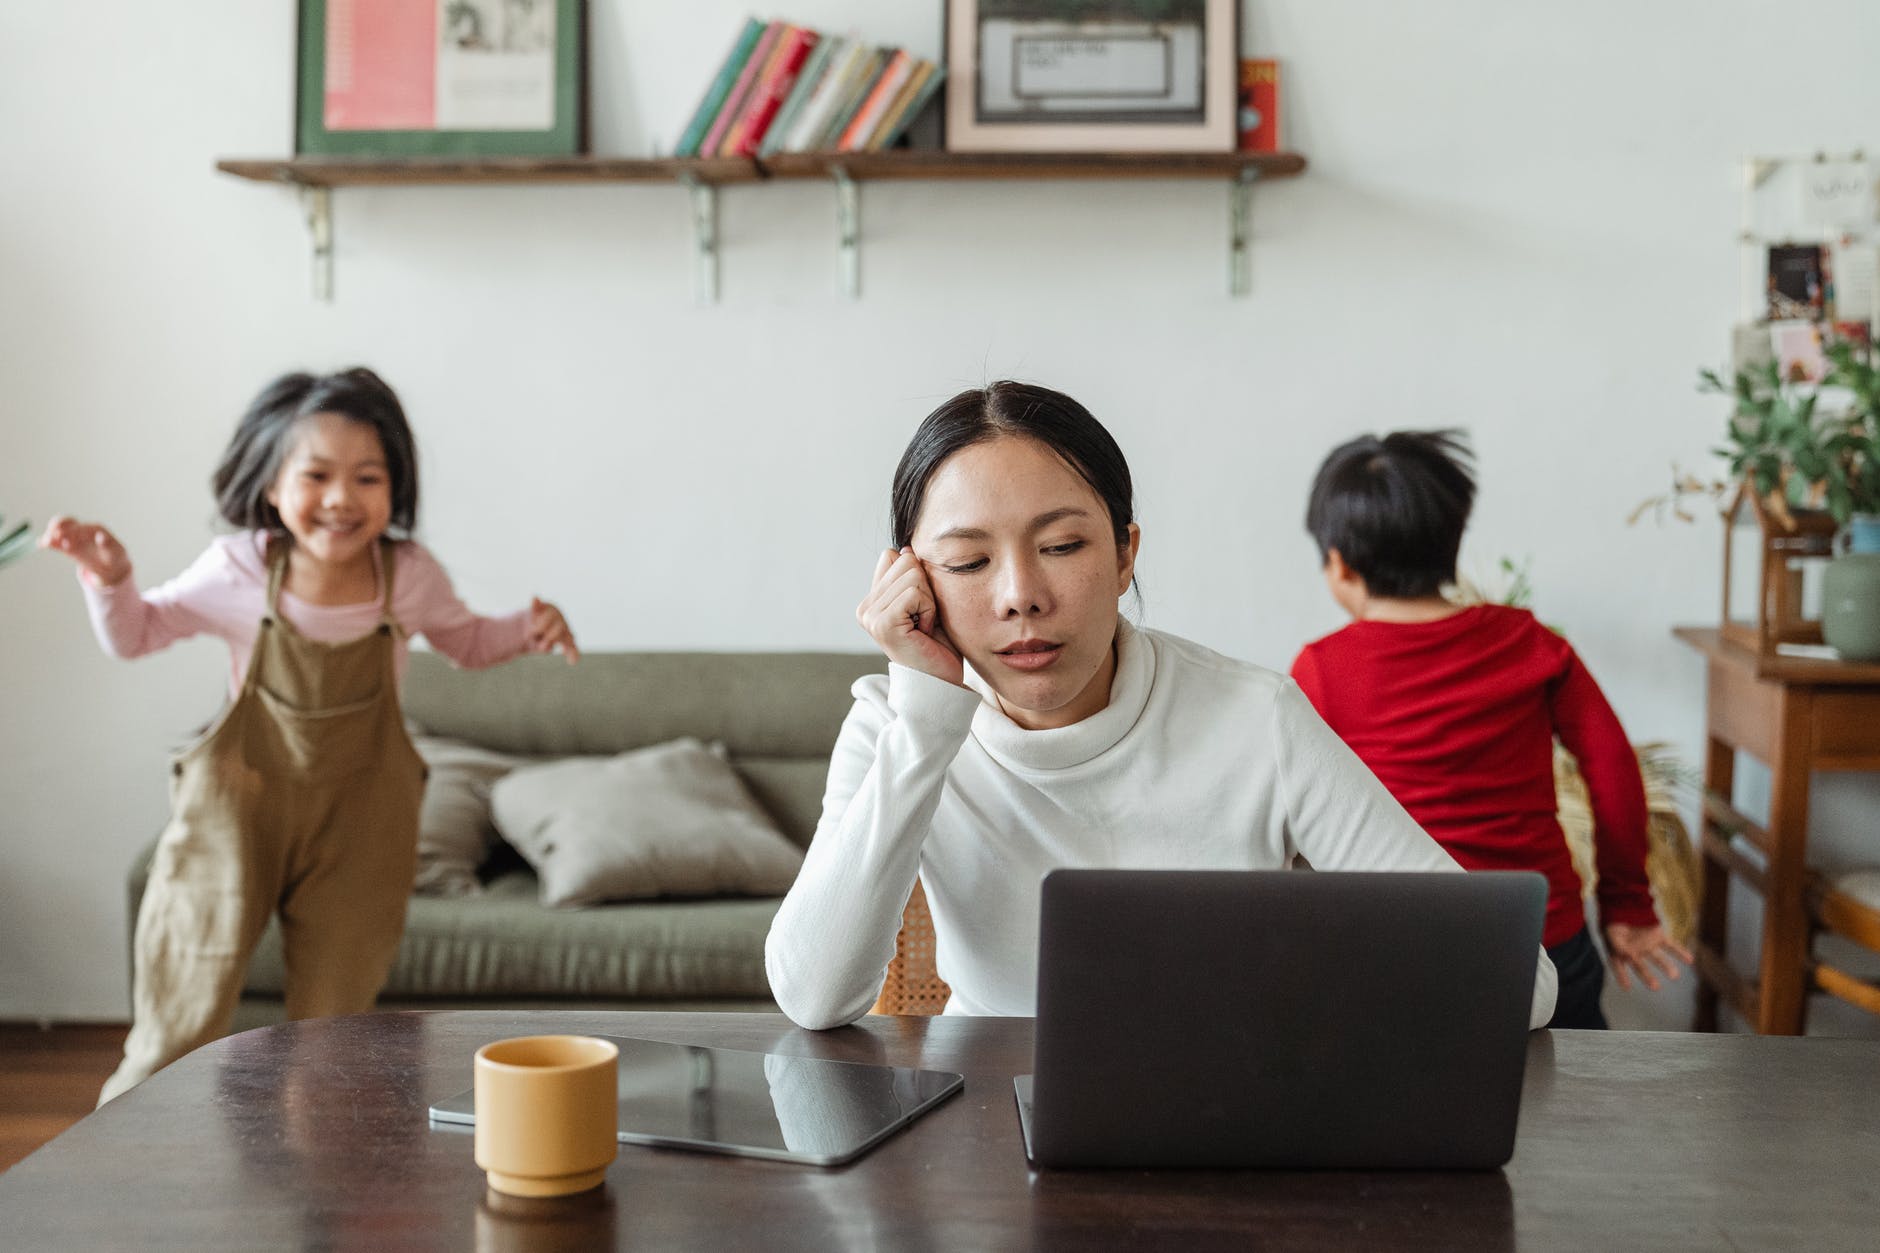 kids making noise and disturbing mom working at home